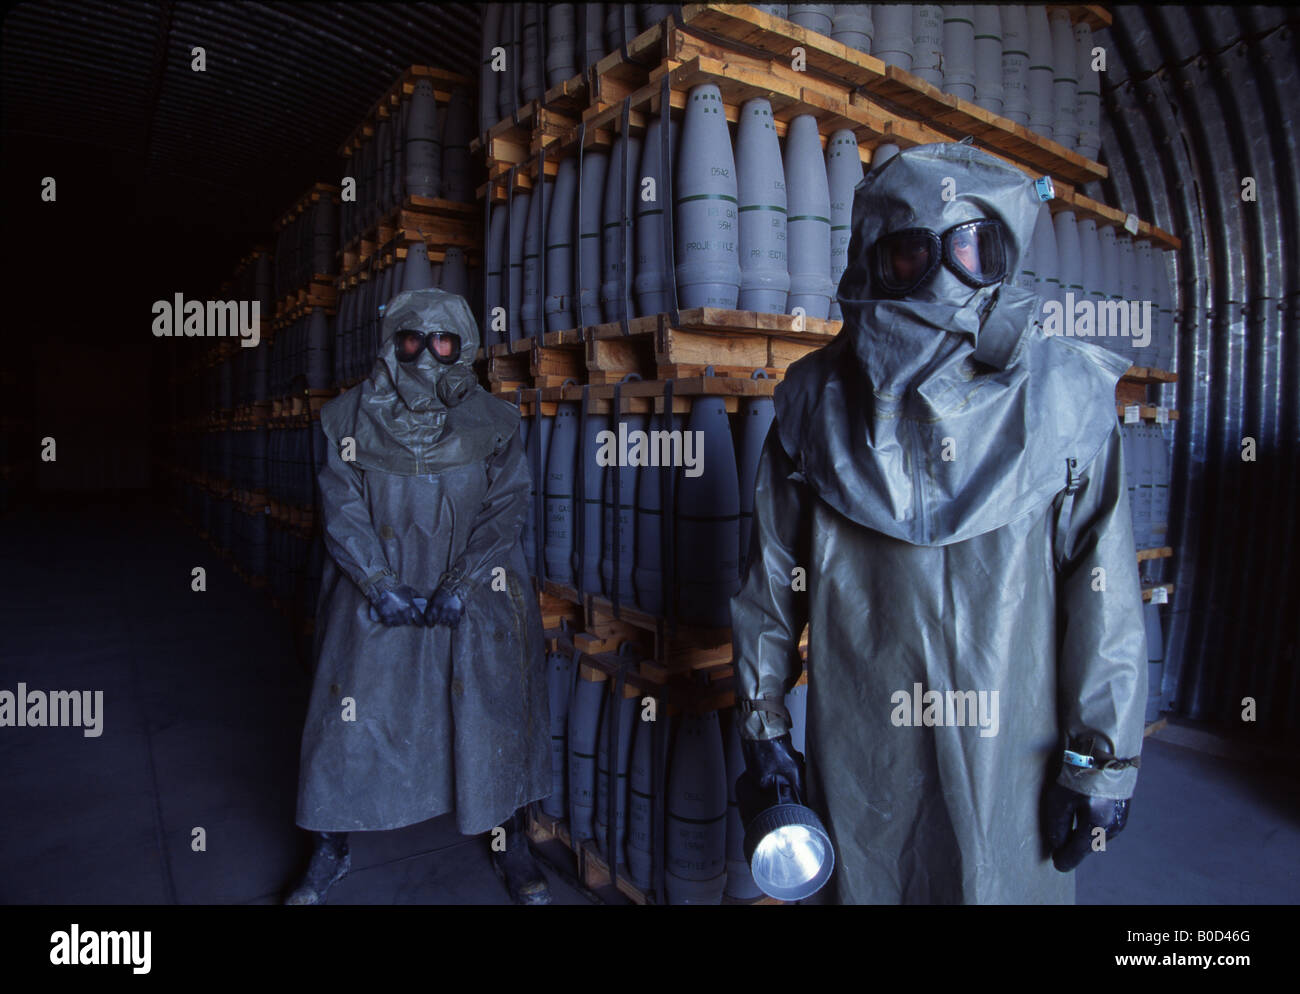 GUARDS AT CHEMICAL WEAPONS STORAGE FACILITY IN SAFETY CLOTHING Stock Photo